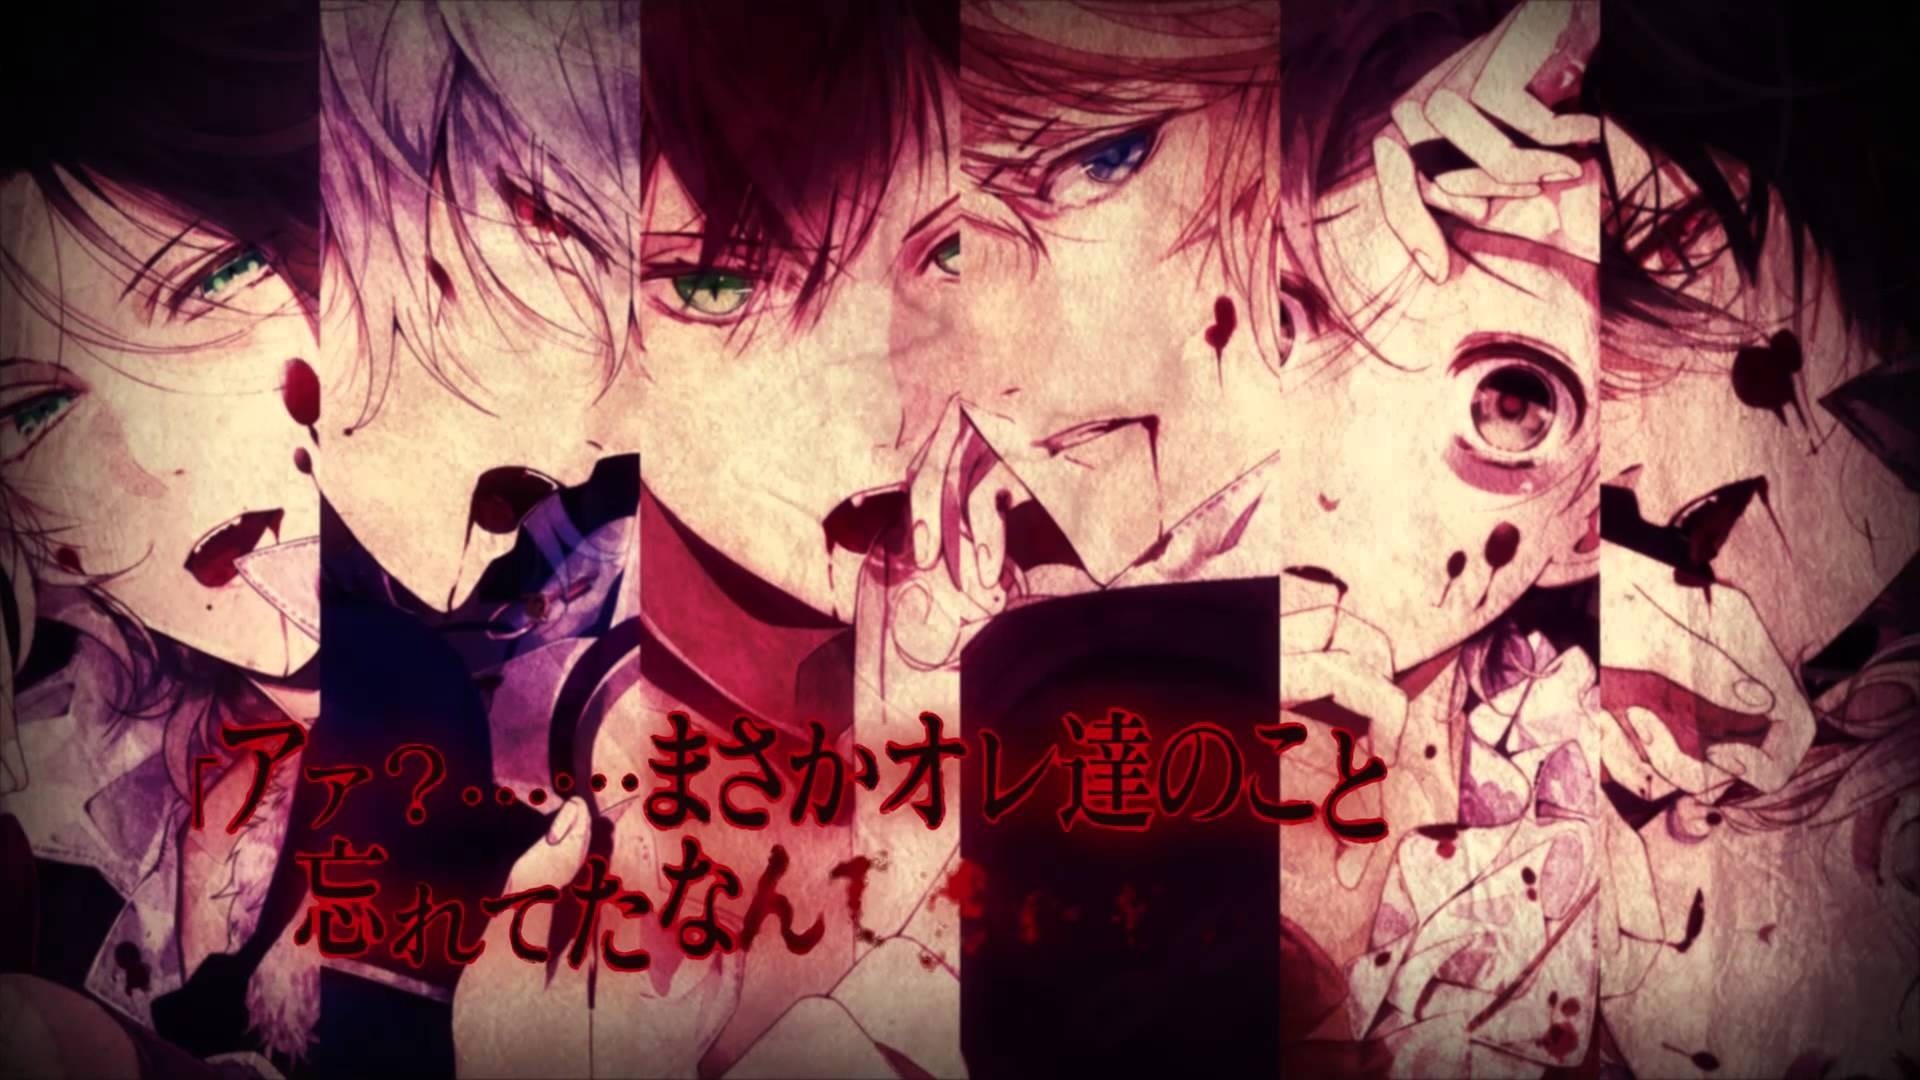 1920x1080 DIABOLIK LOVERS, all the characters